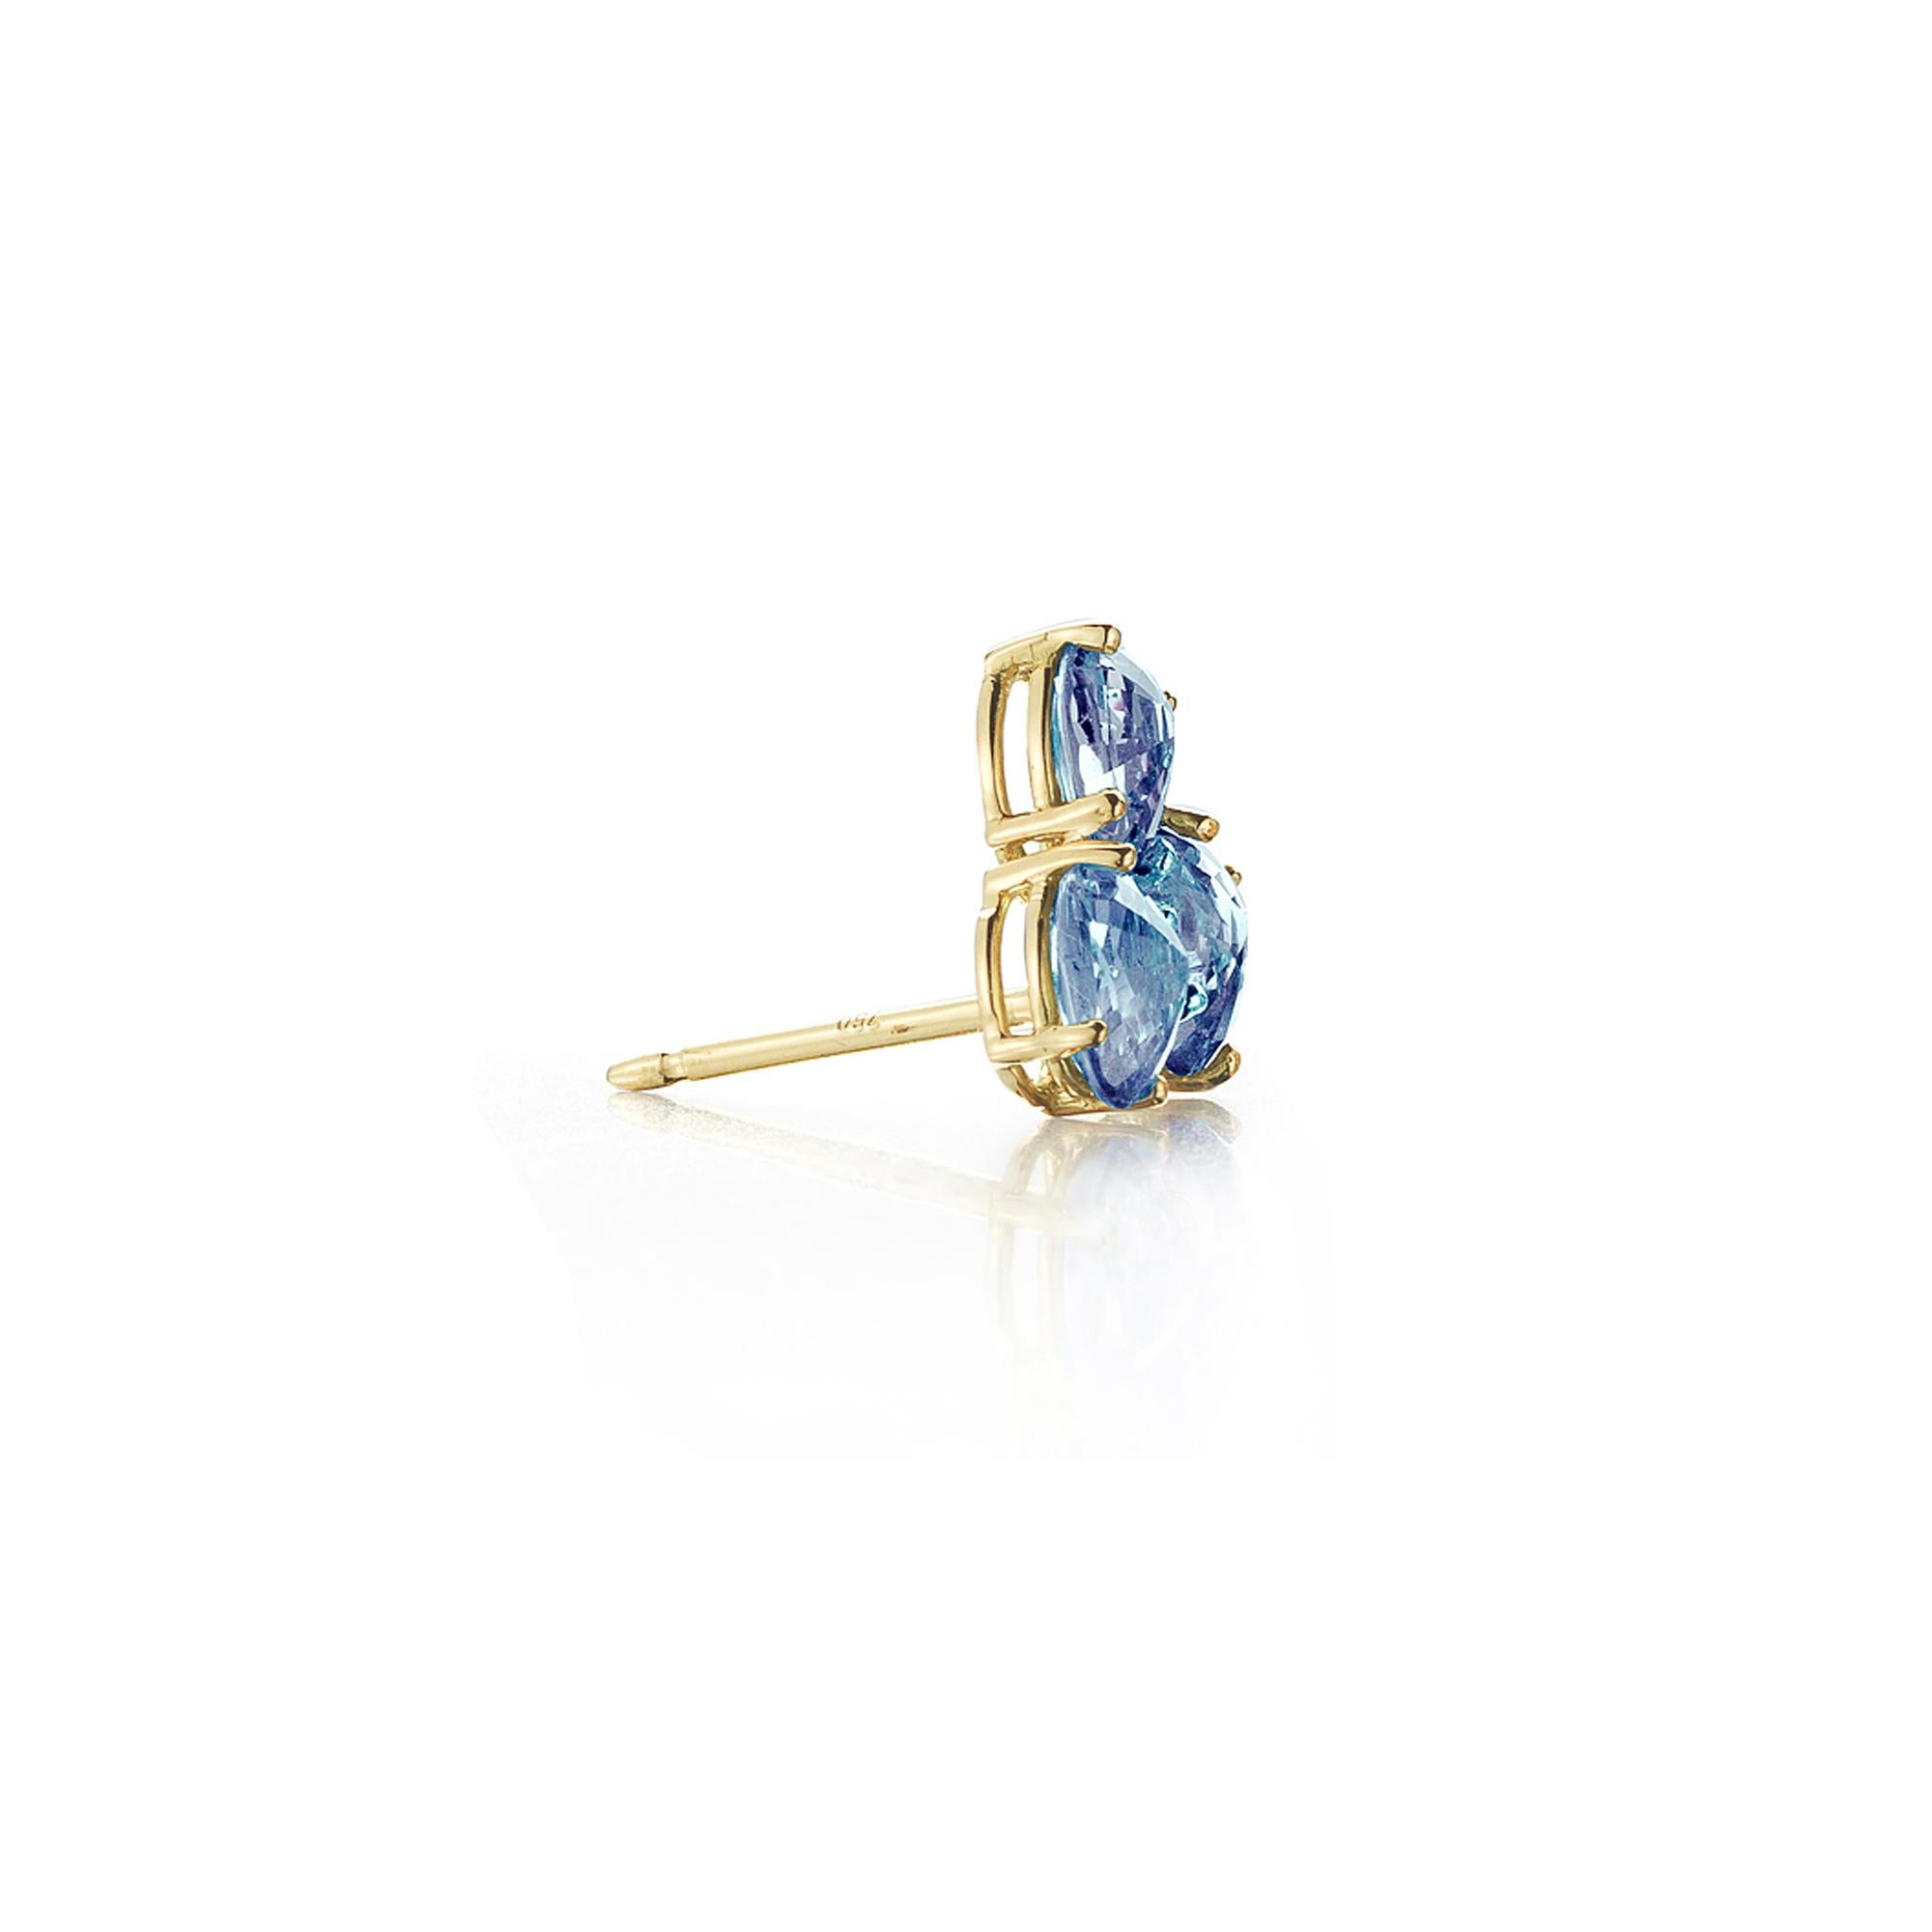 18kt yellow gold Ombré stud earring set with oval blue sapphires.

Reimagined from summers spent at the Tuscan shore, the Ombré collection highlights the diverse hues and textures found in sapphires. Paolo Costagli hand selects the sapphires in